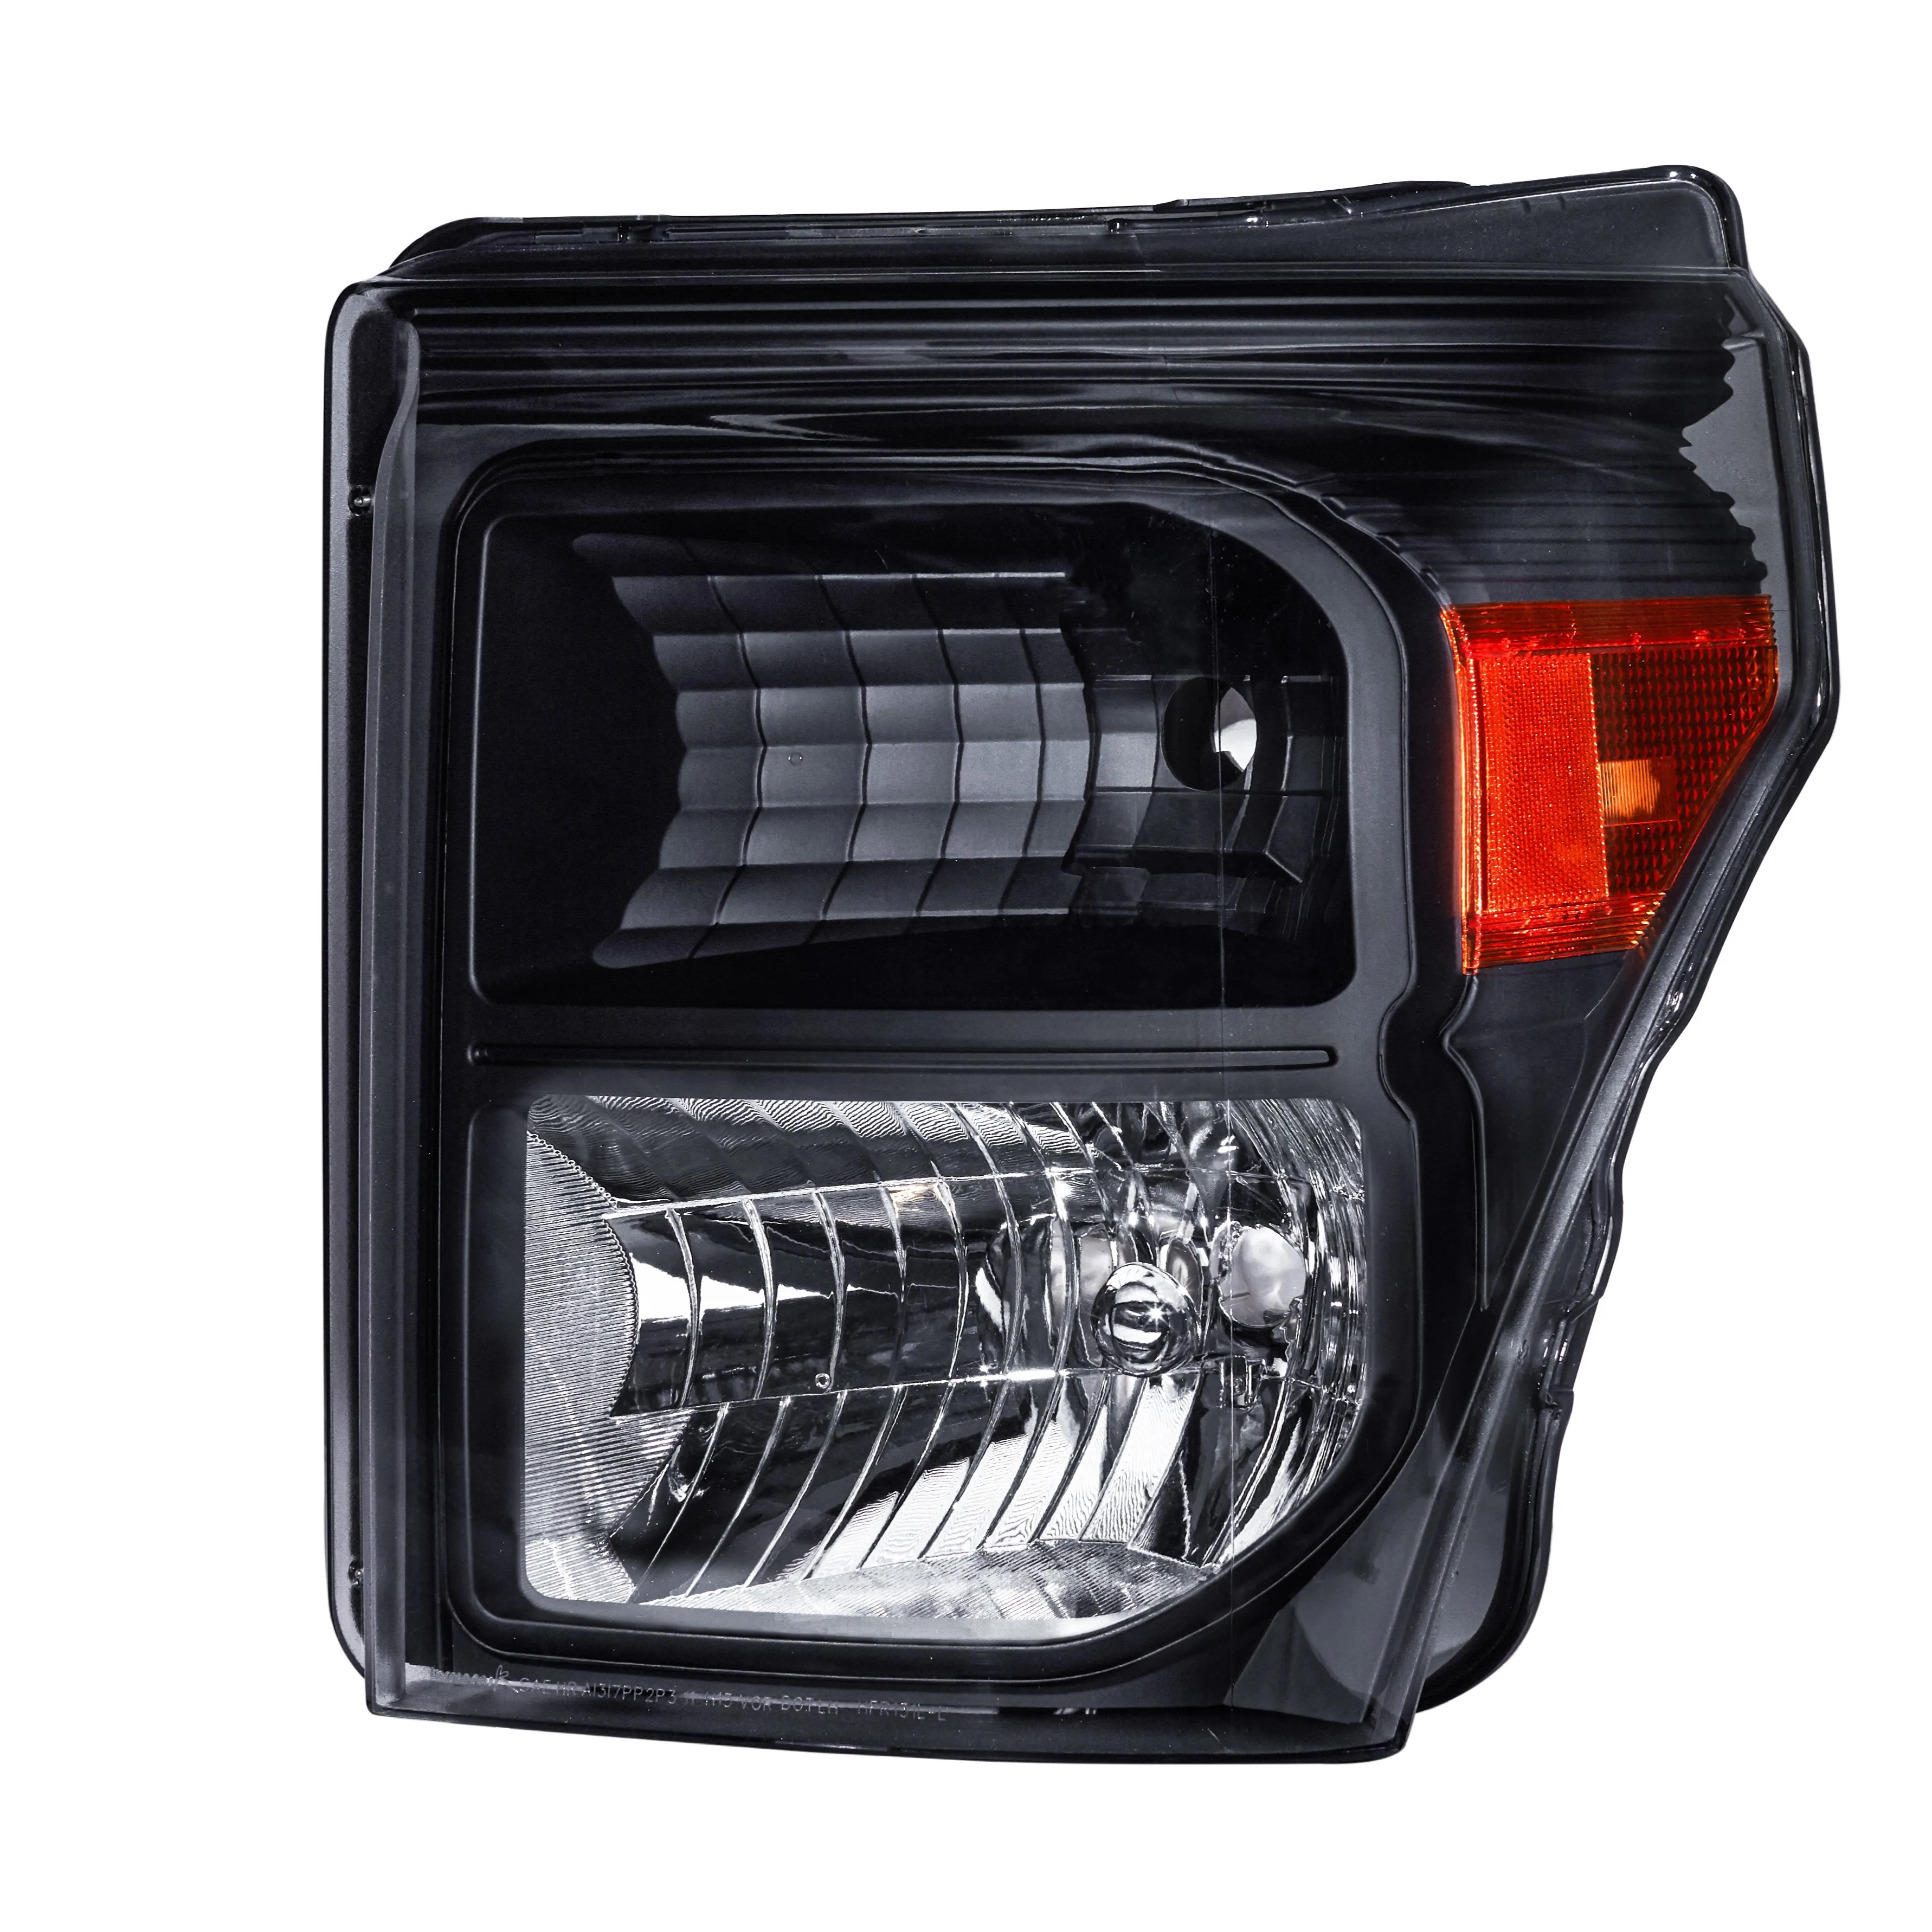 Hot-selling Super Duty Factory Style Headlights w/ Amber Reflectors FOR 2011-2016 Ford F250/F350/F450/F550 (Black /Clear)